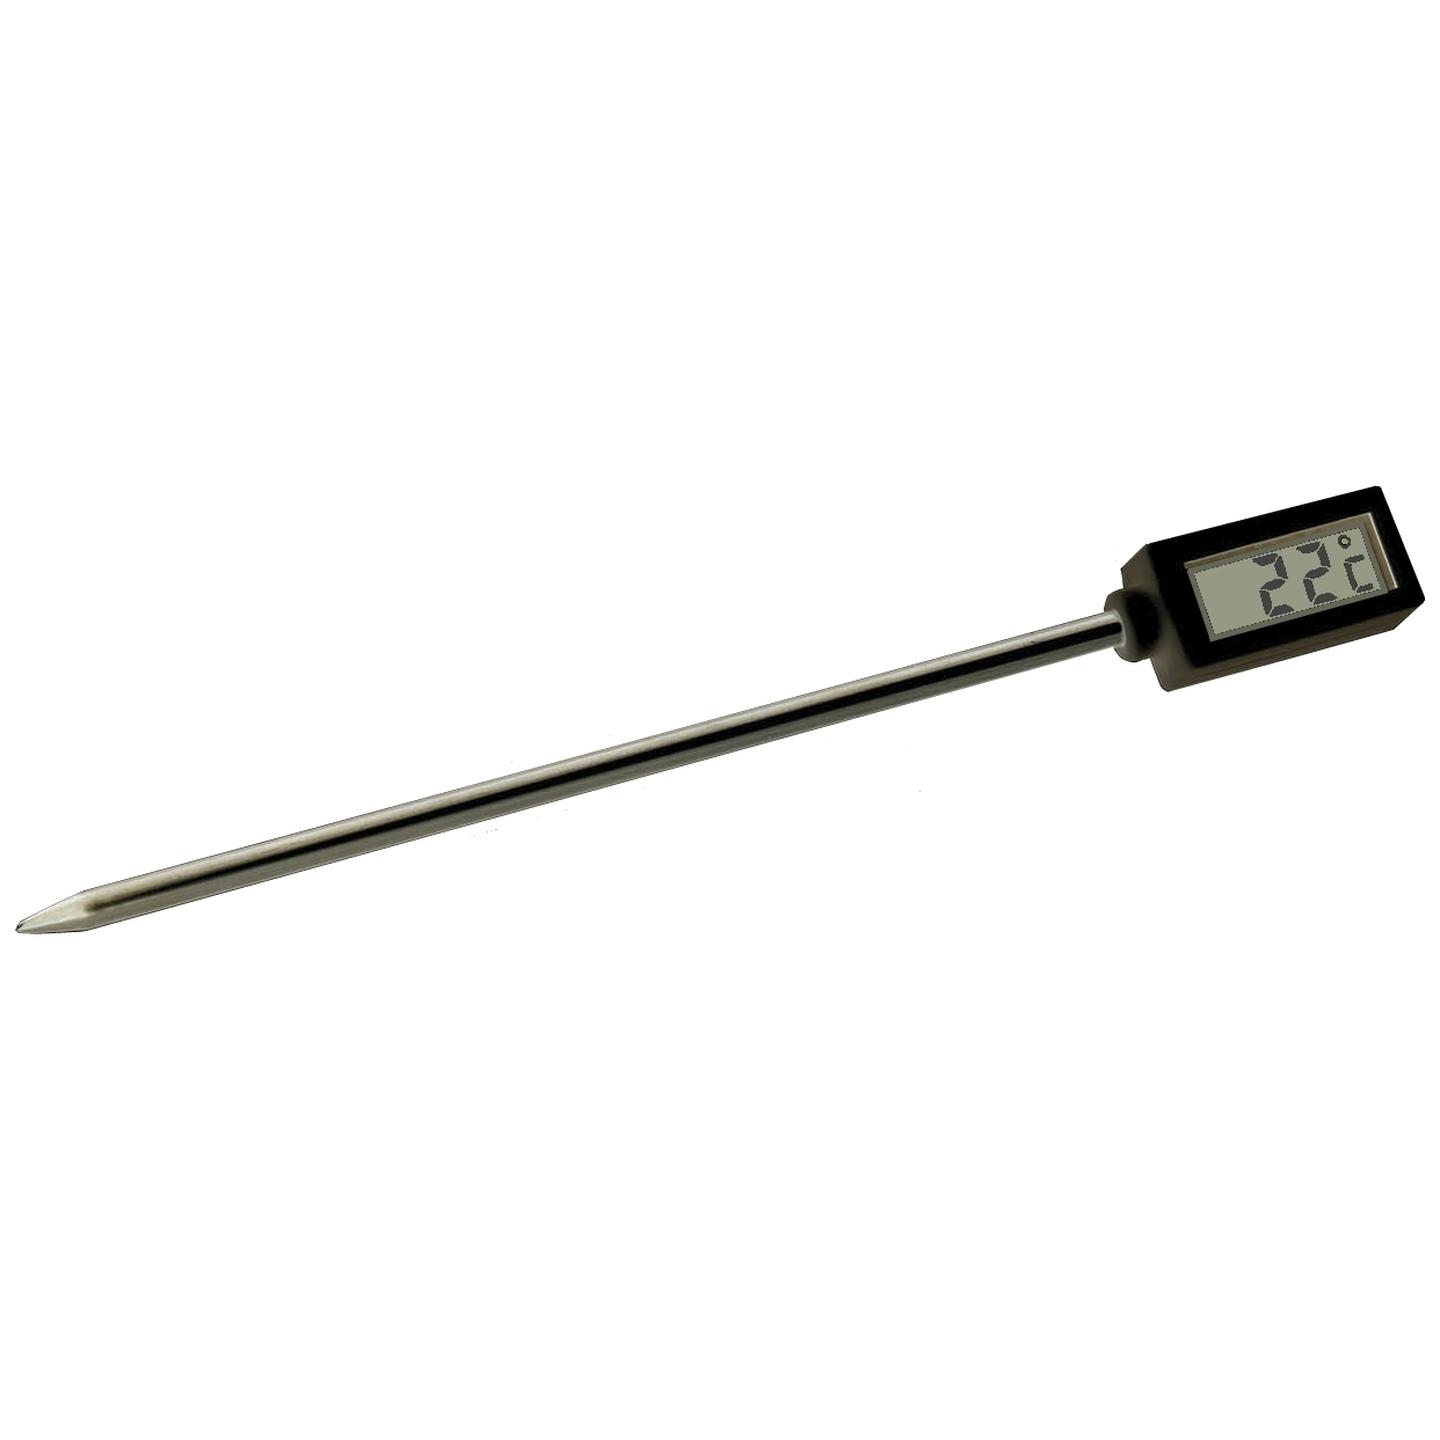 LCD Probe Thermometer